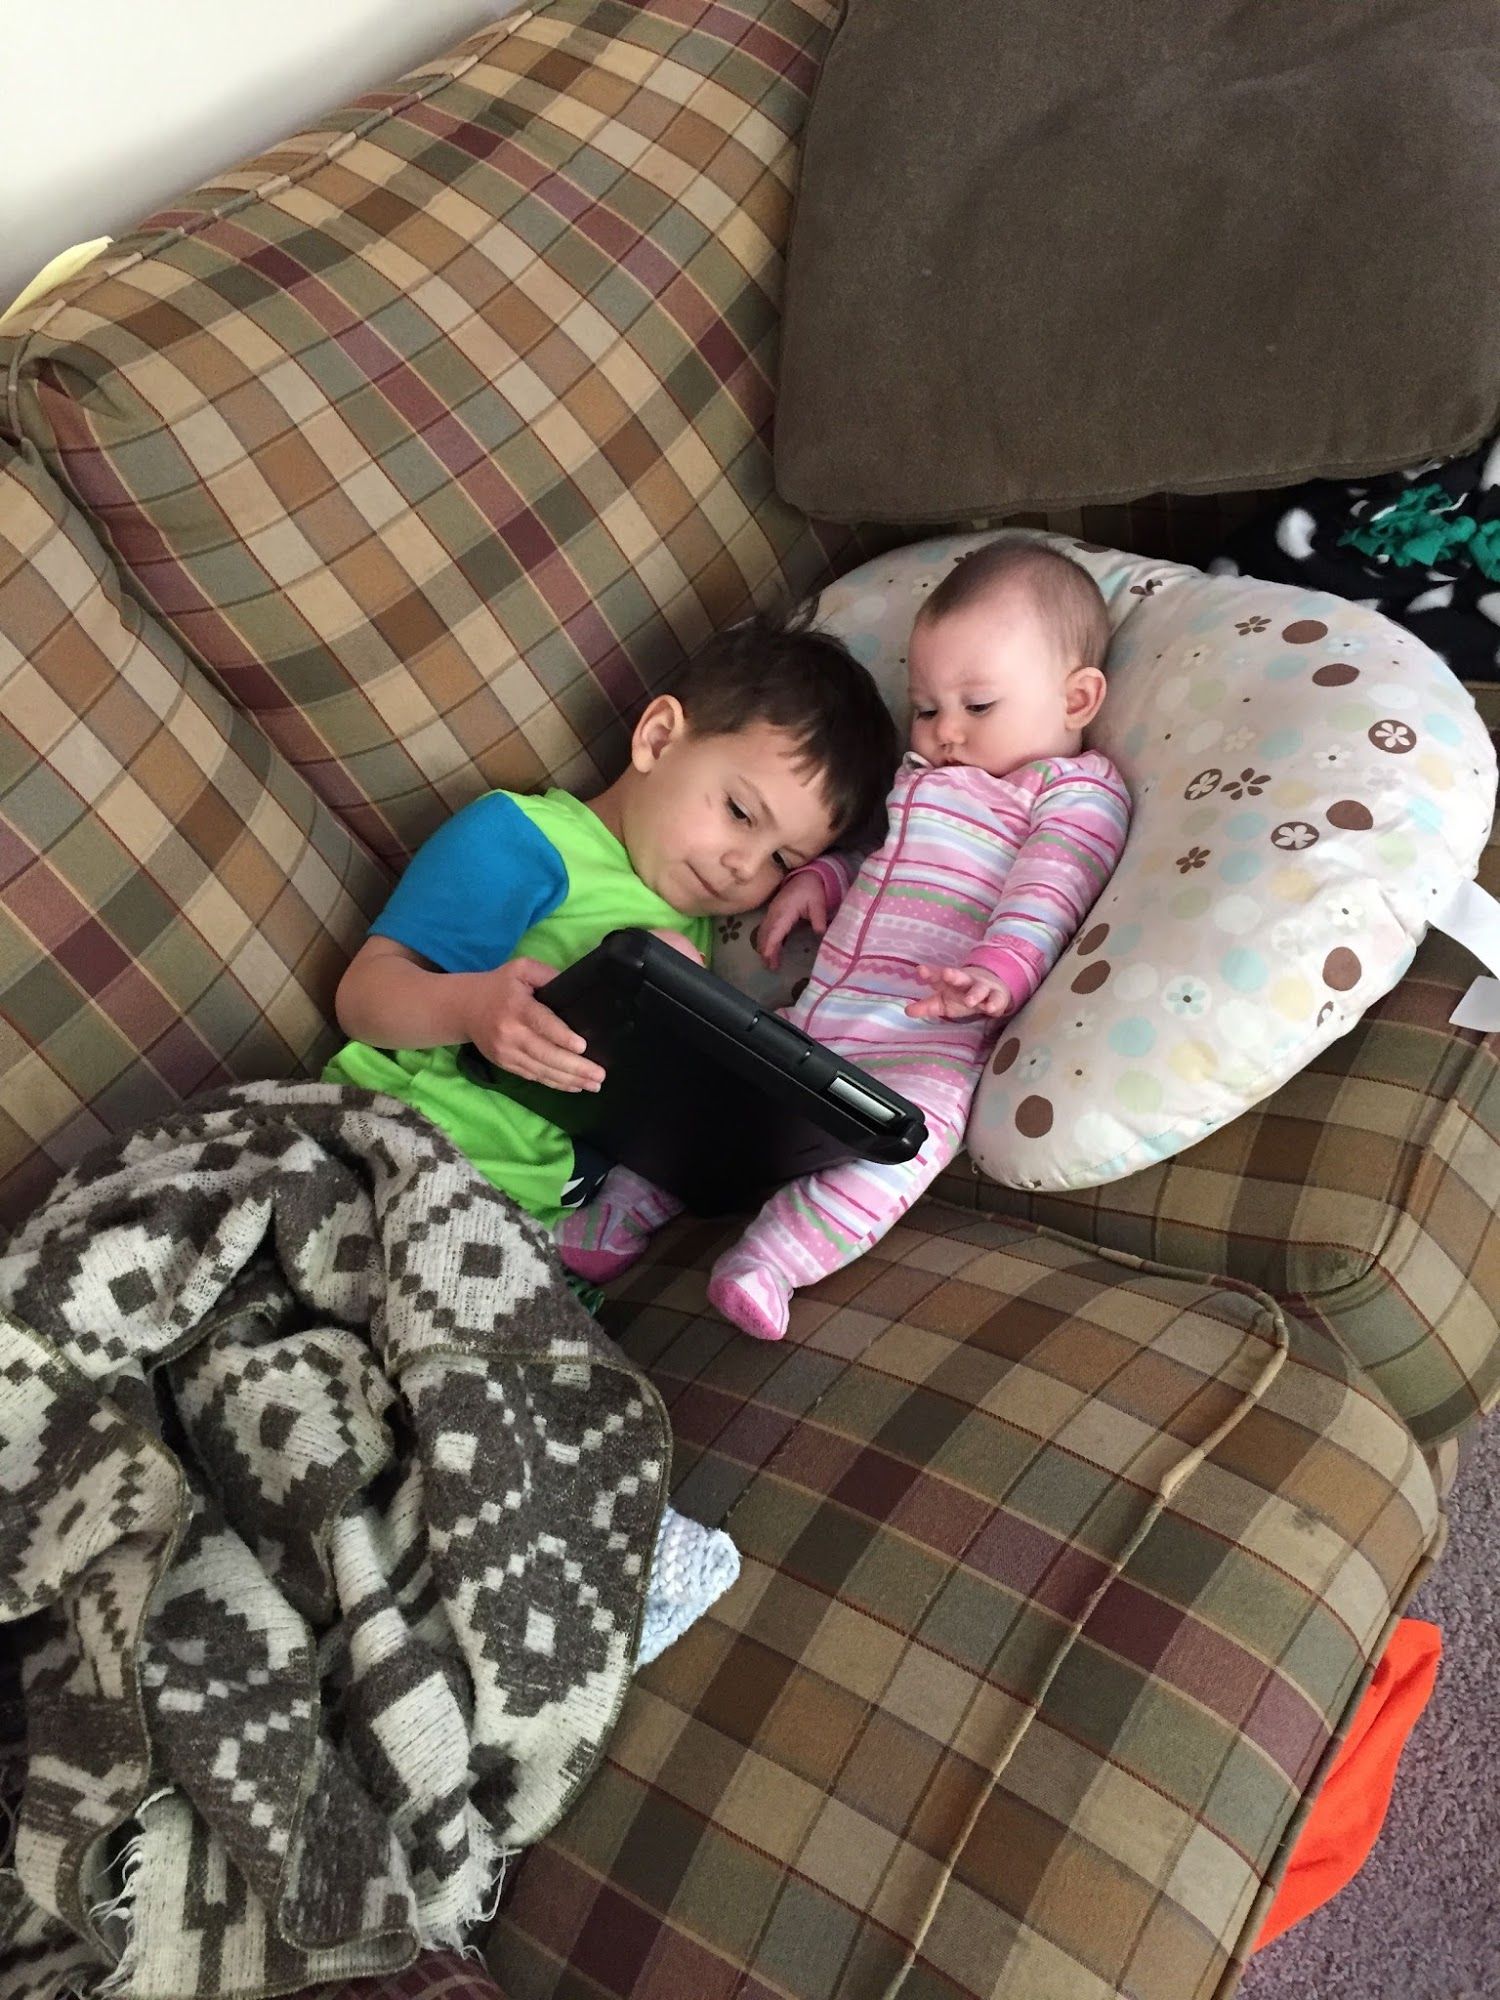  Mr. Bananas and Bean hanging out together.Mr. Bananas loves sharing the iPad with his sister.He really can't get enough of her. 